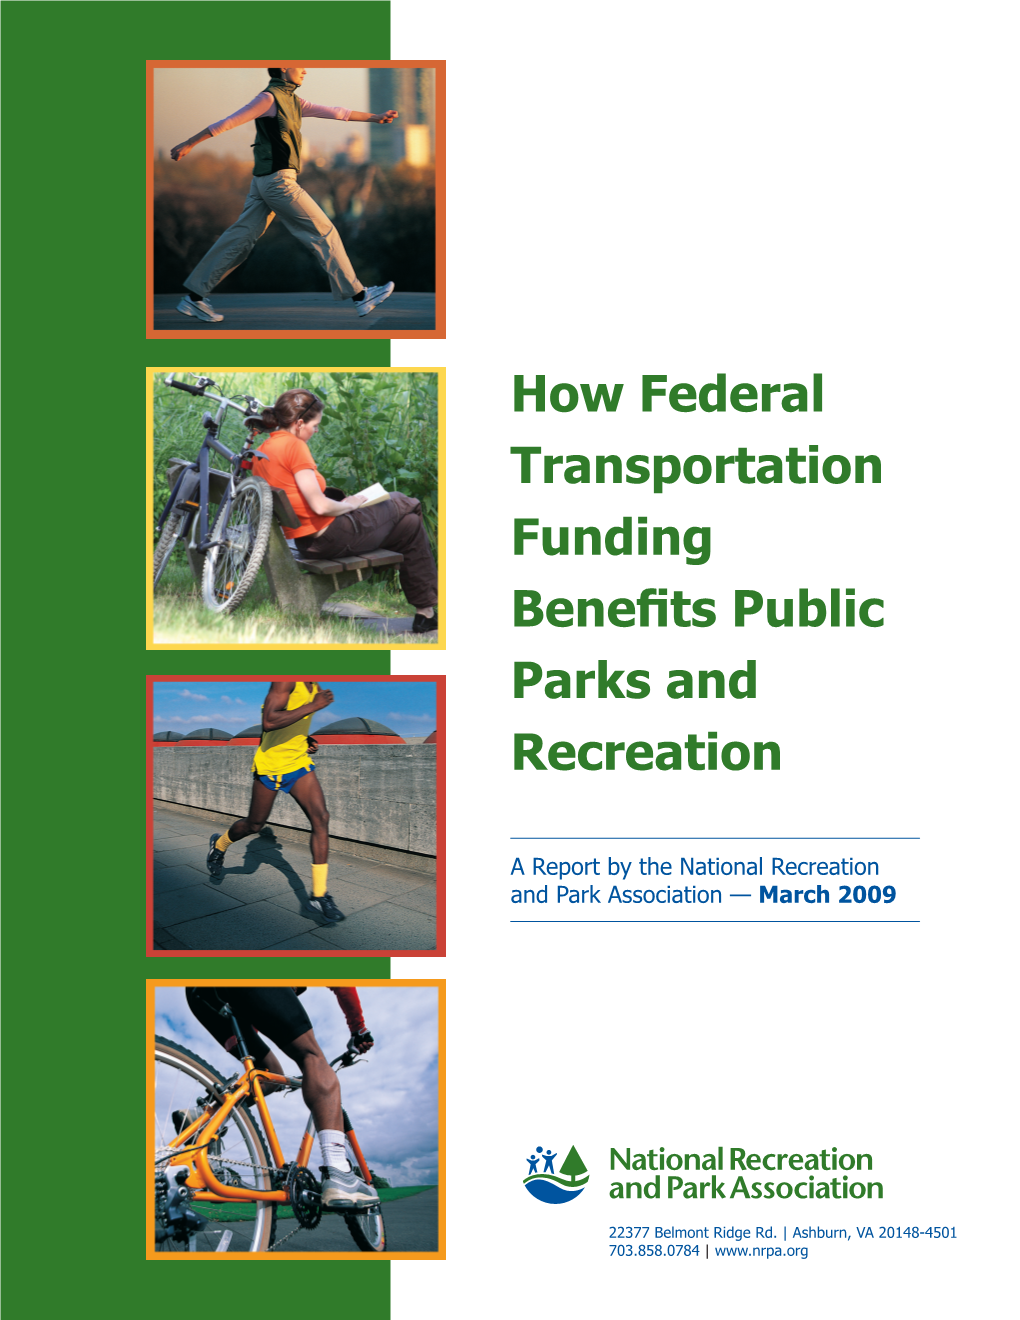 How Federal Transportation Funding Benefits Public Parks and Recreation